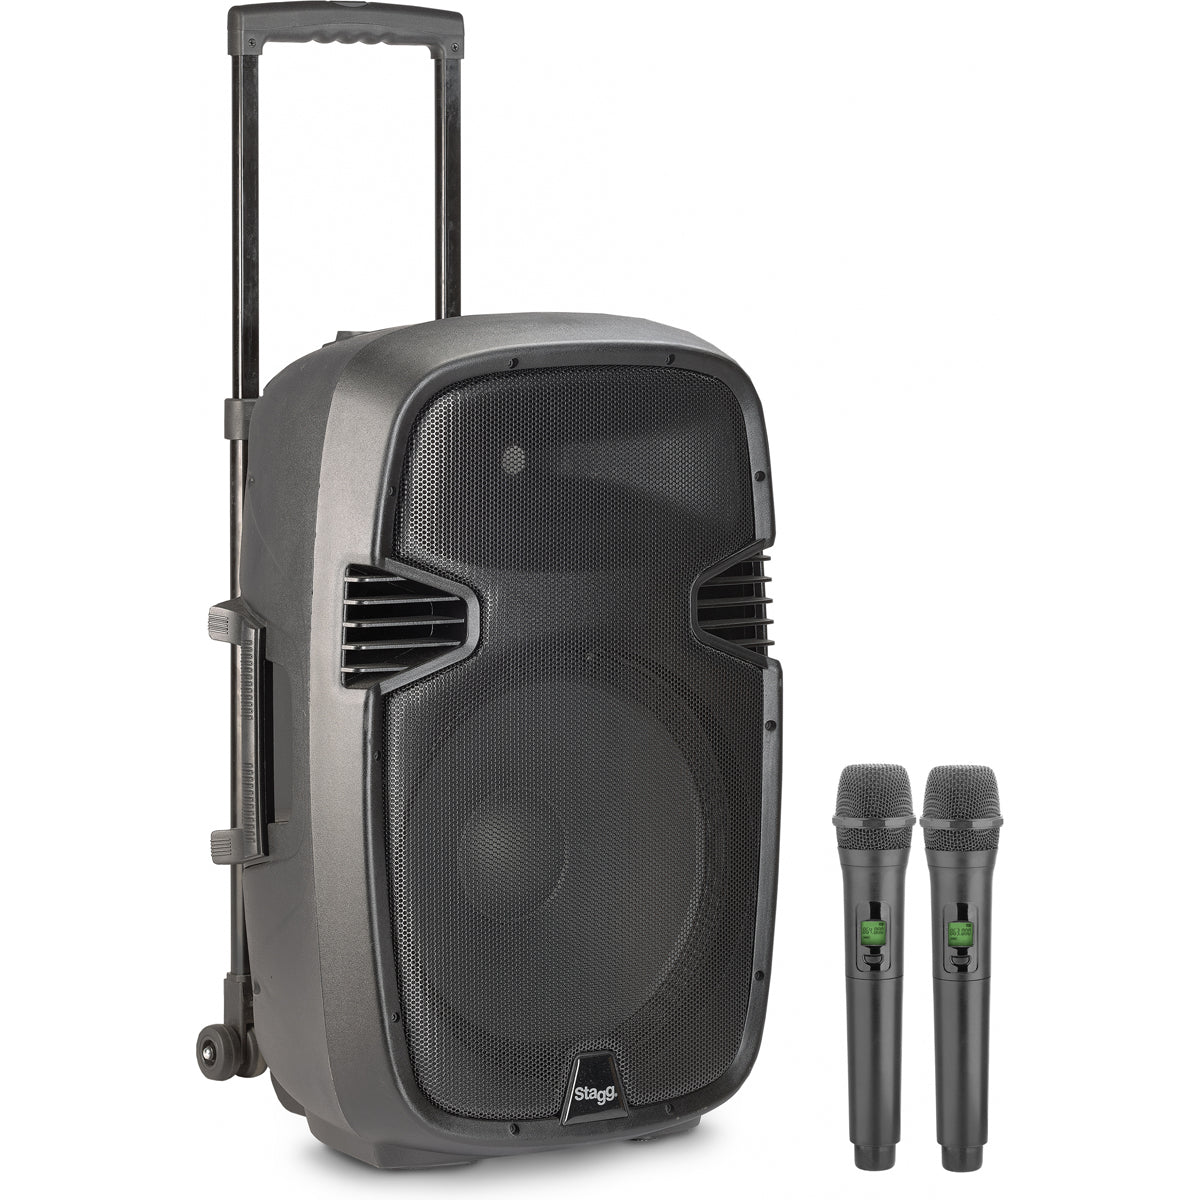 Stagg 15" Portable Speaker with x2 Wireless Microphones